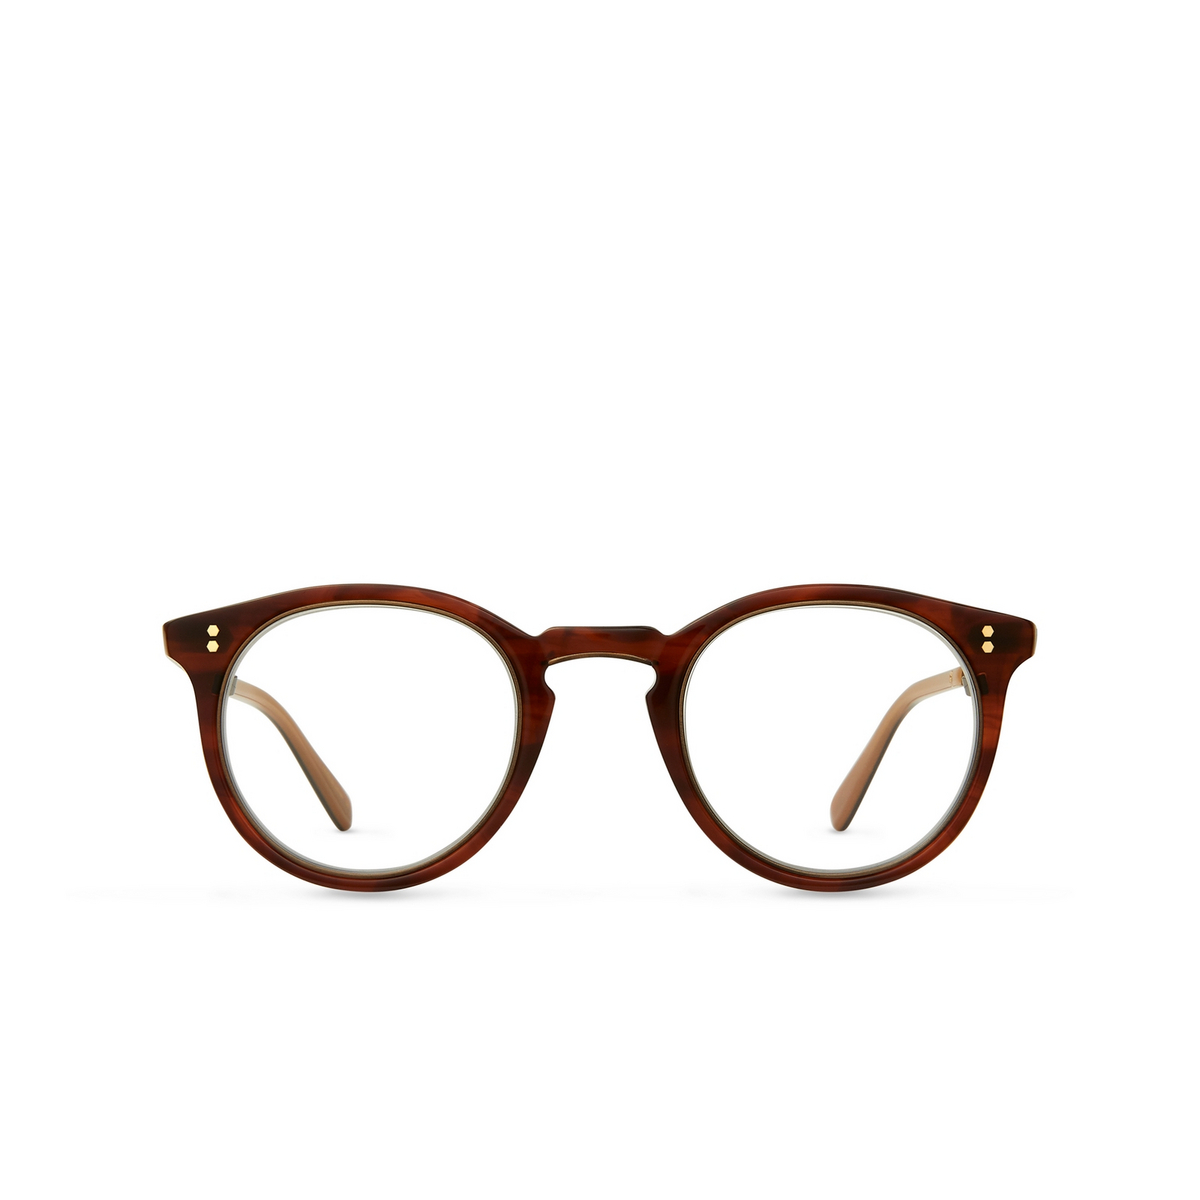 Mr. Leight CROSBY C Eyeglasses HLA-ATG Honey Laminate-Antique Gold - front view